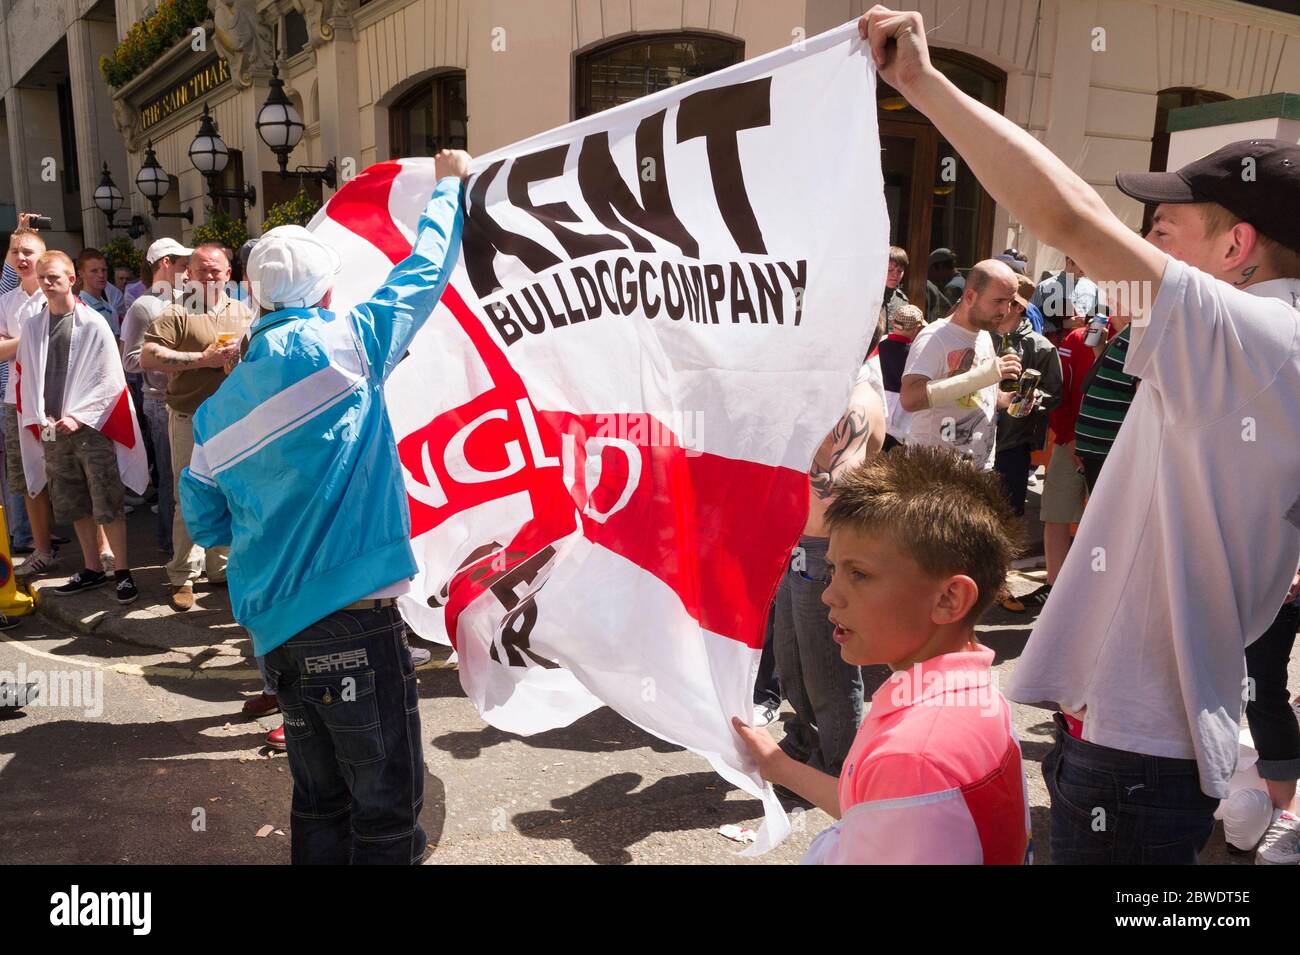 English Defence League (EDL) members on a March organised by group calling itself 'British Citizens Against Muslim Extremists'. The protest is about t Stock Photo